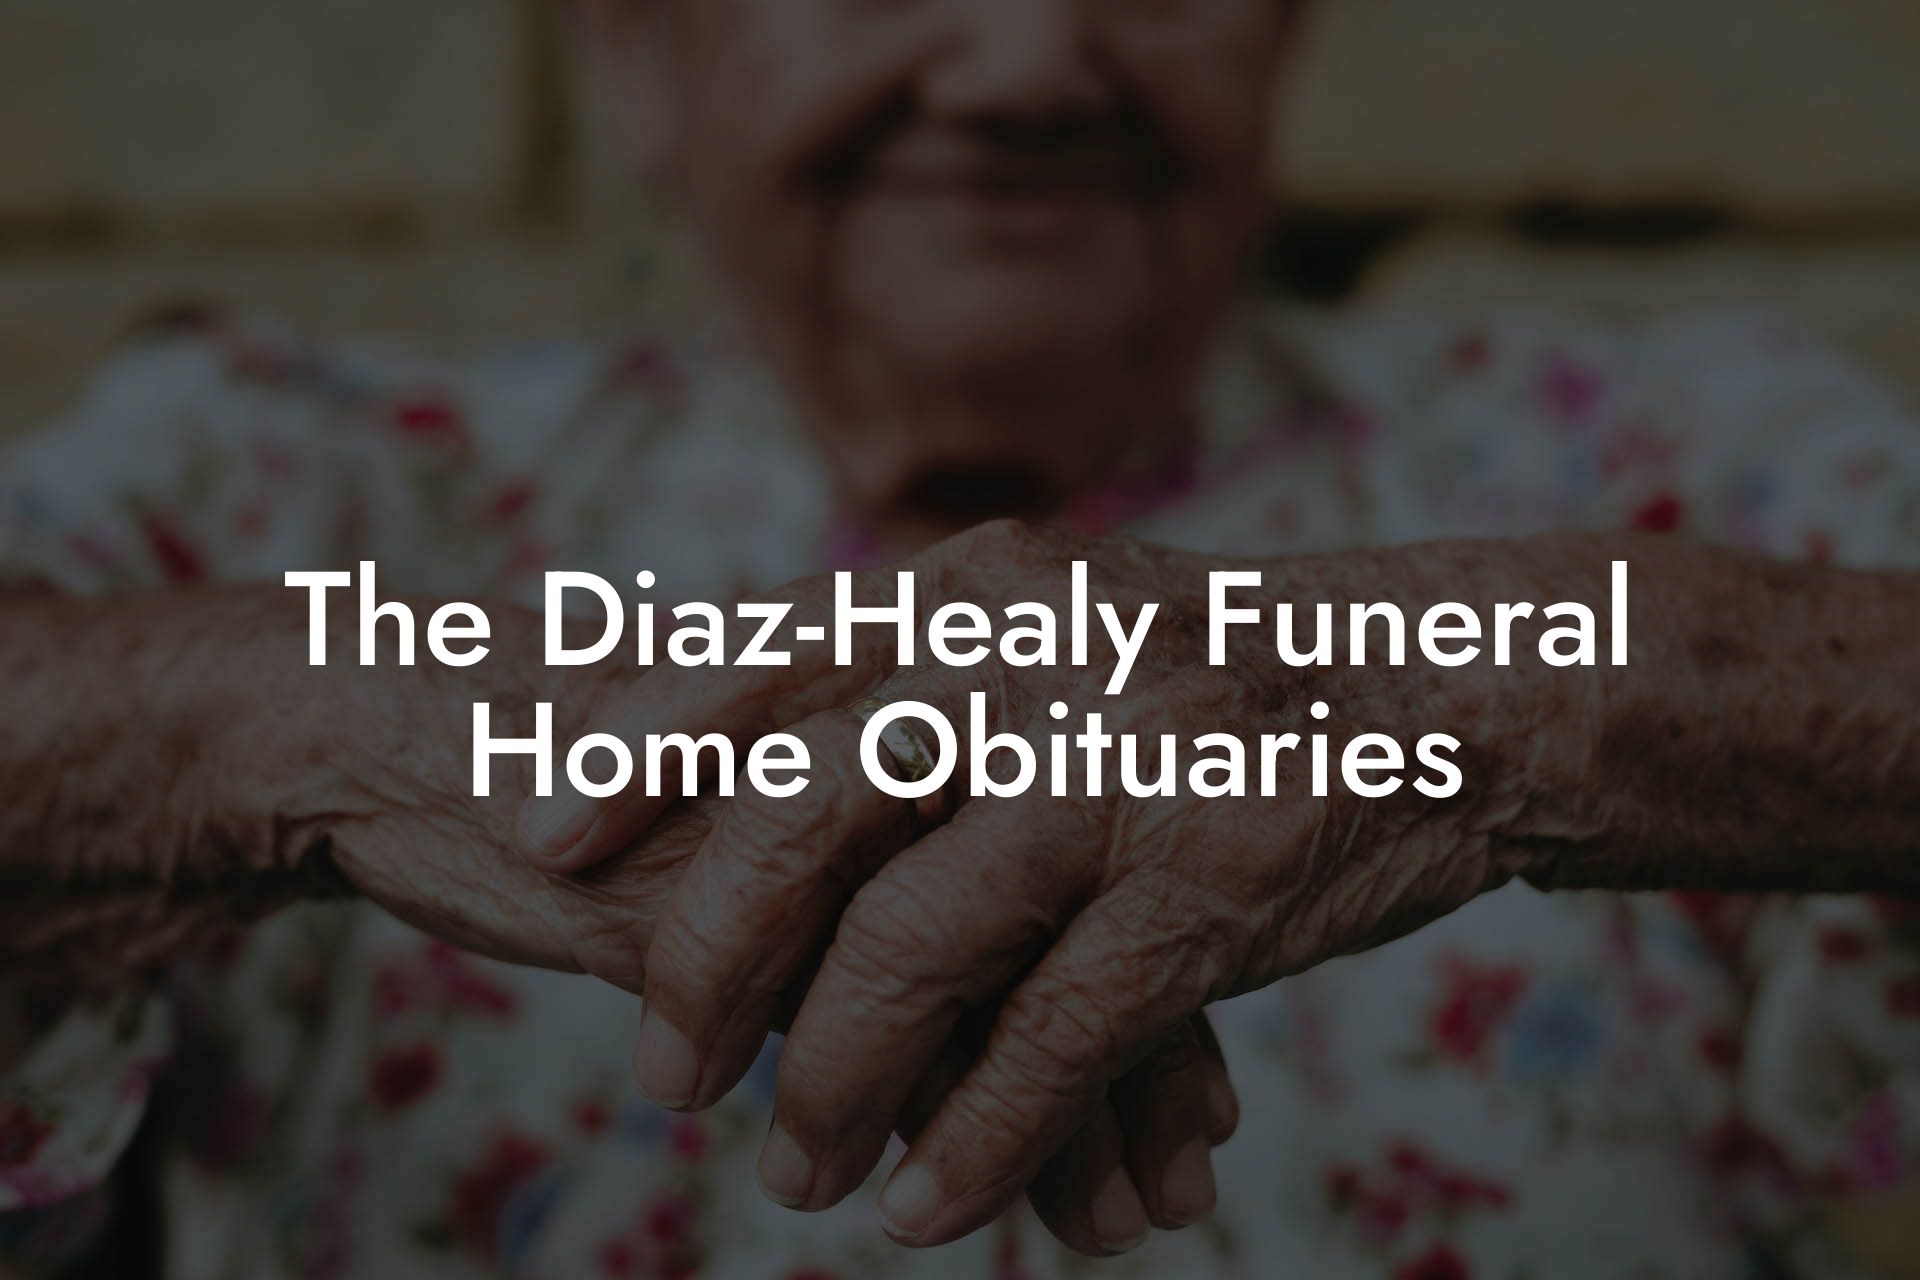 The Diaz-Healy Funeral Home Obituaries